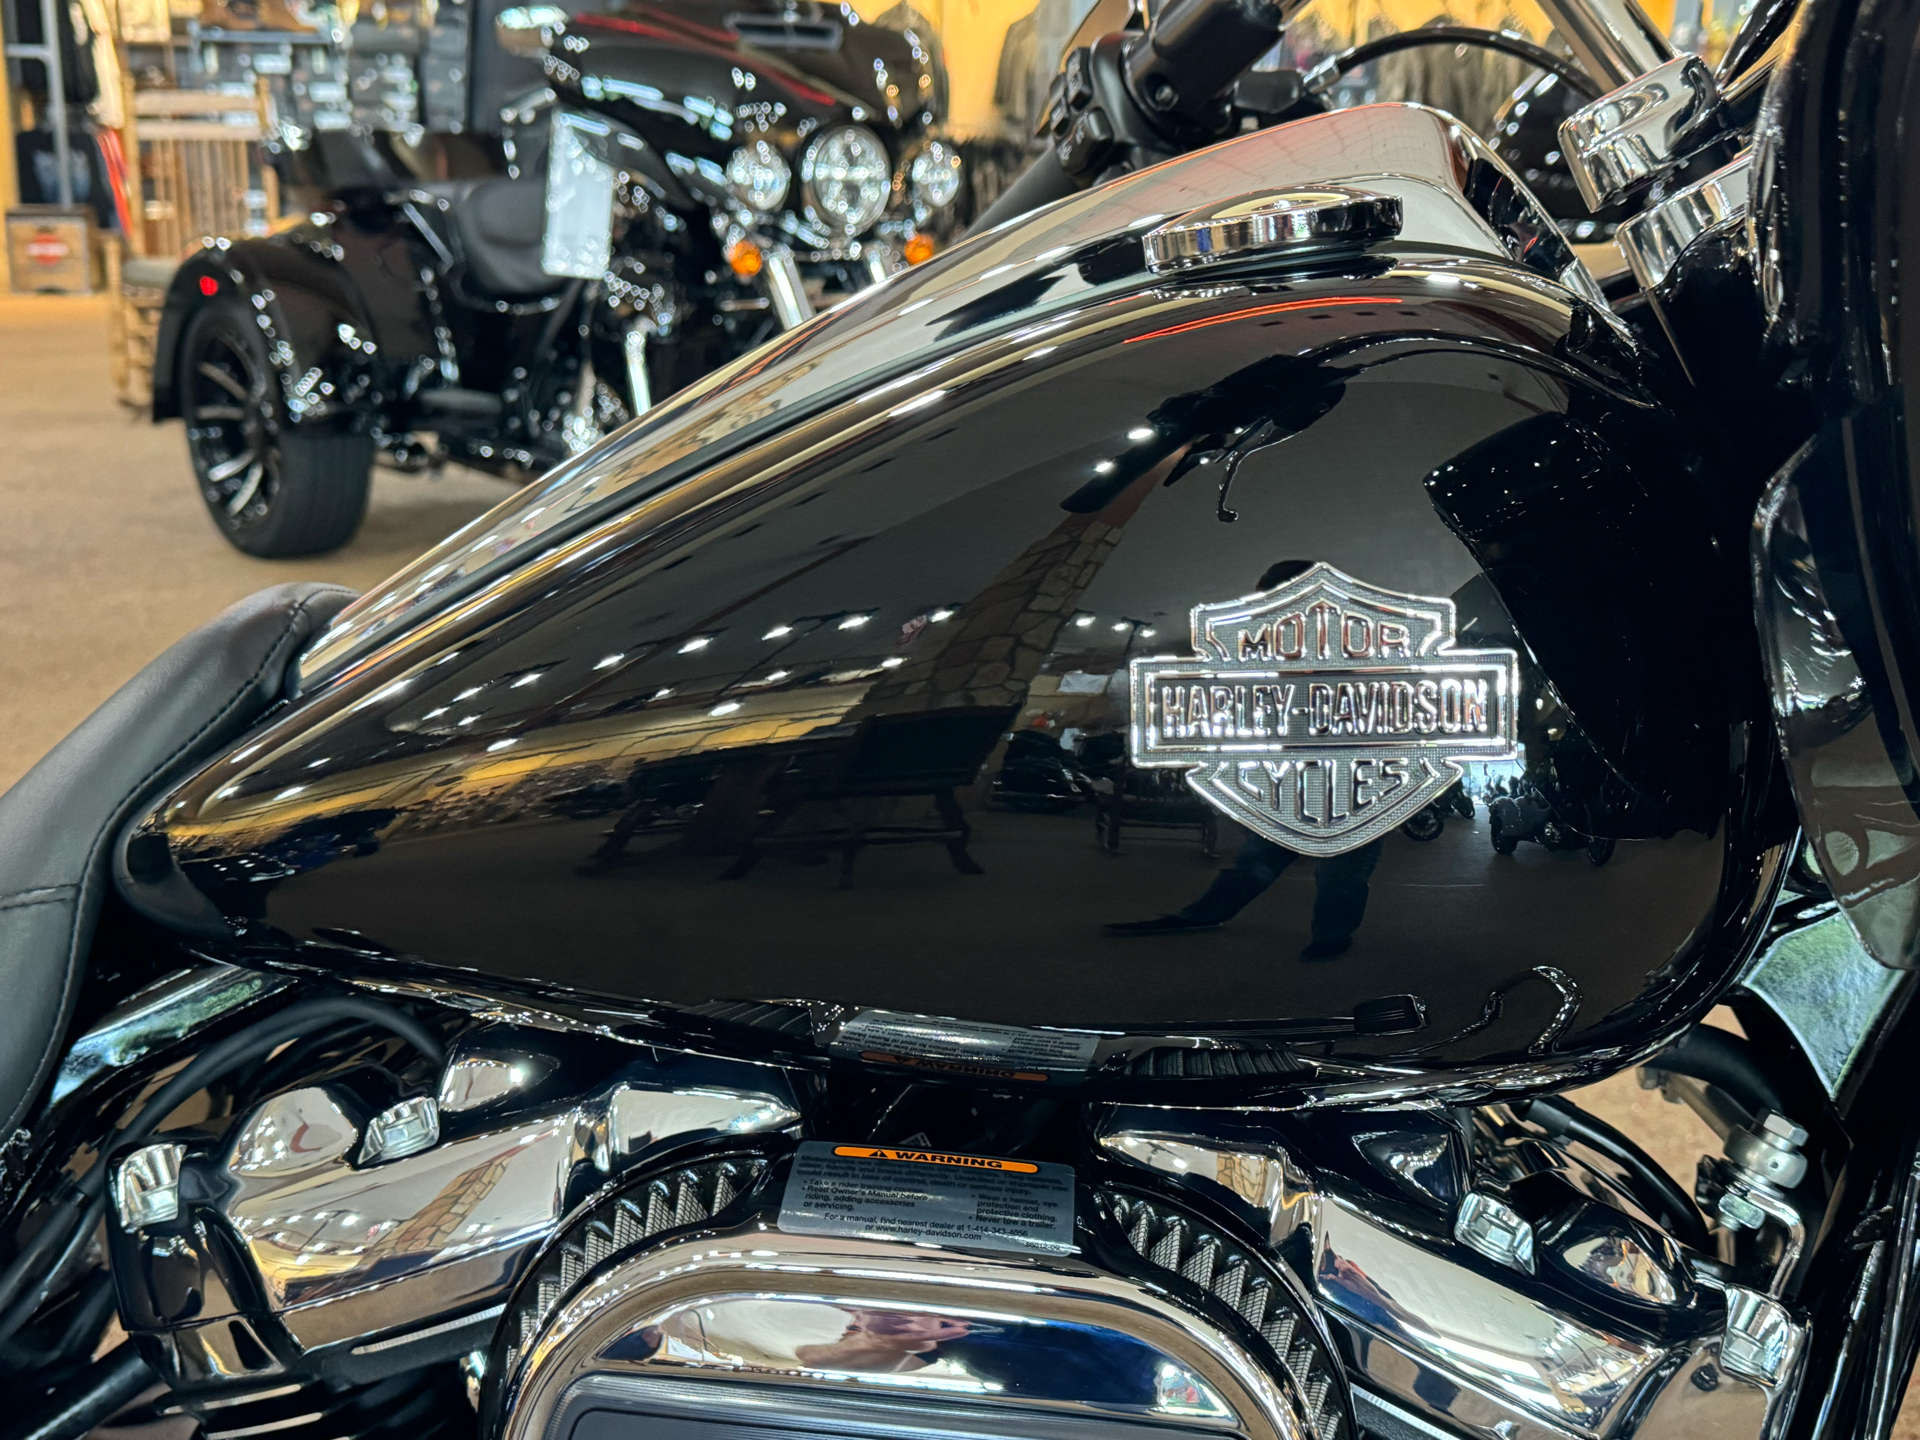 2023 Harley-Davidson Road Glide® Special in Knoxville, Tennessee - Photo 6